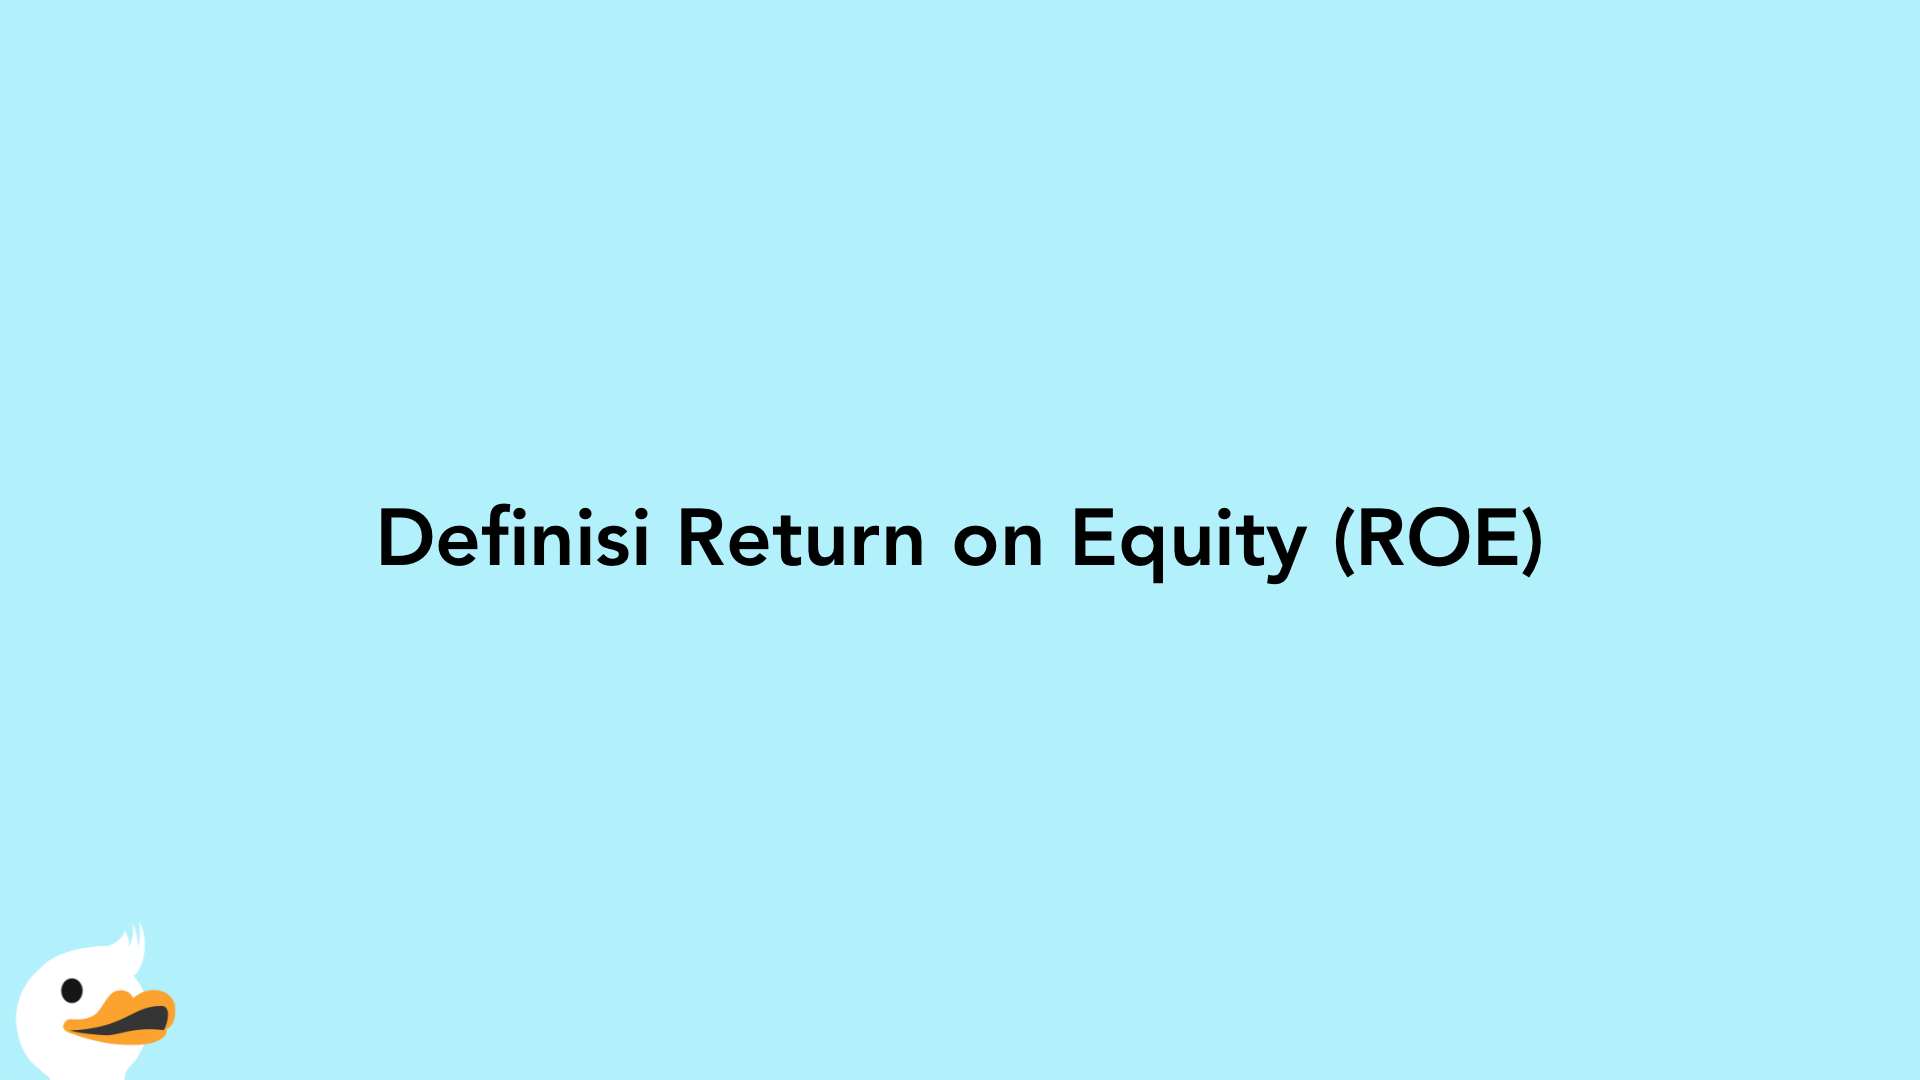 Definisi Return on Equity (ROE)